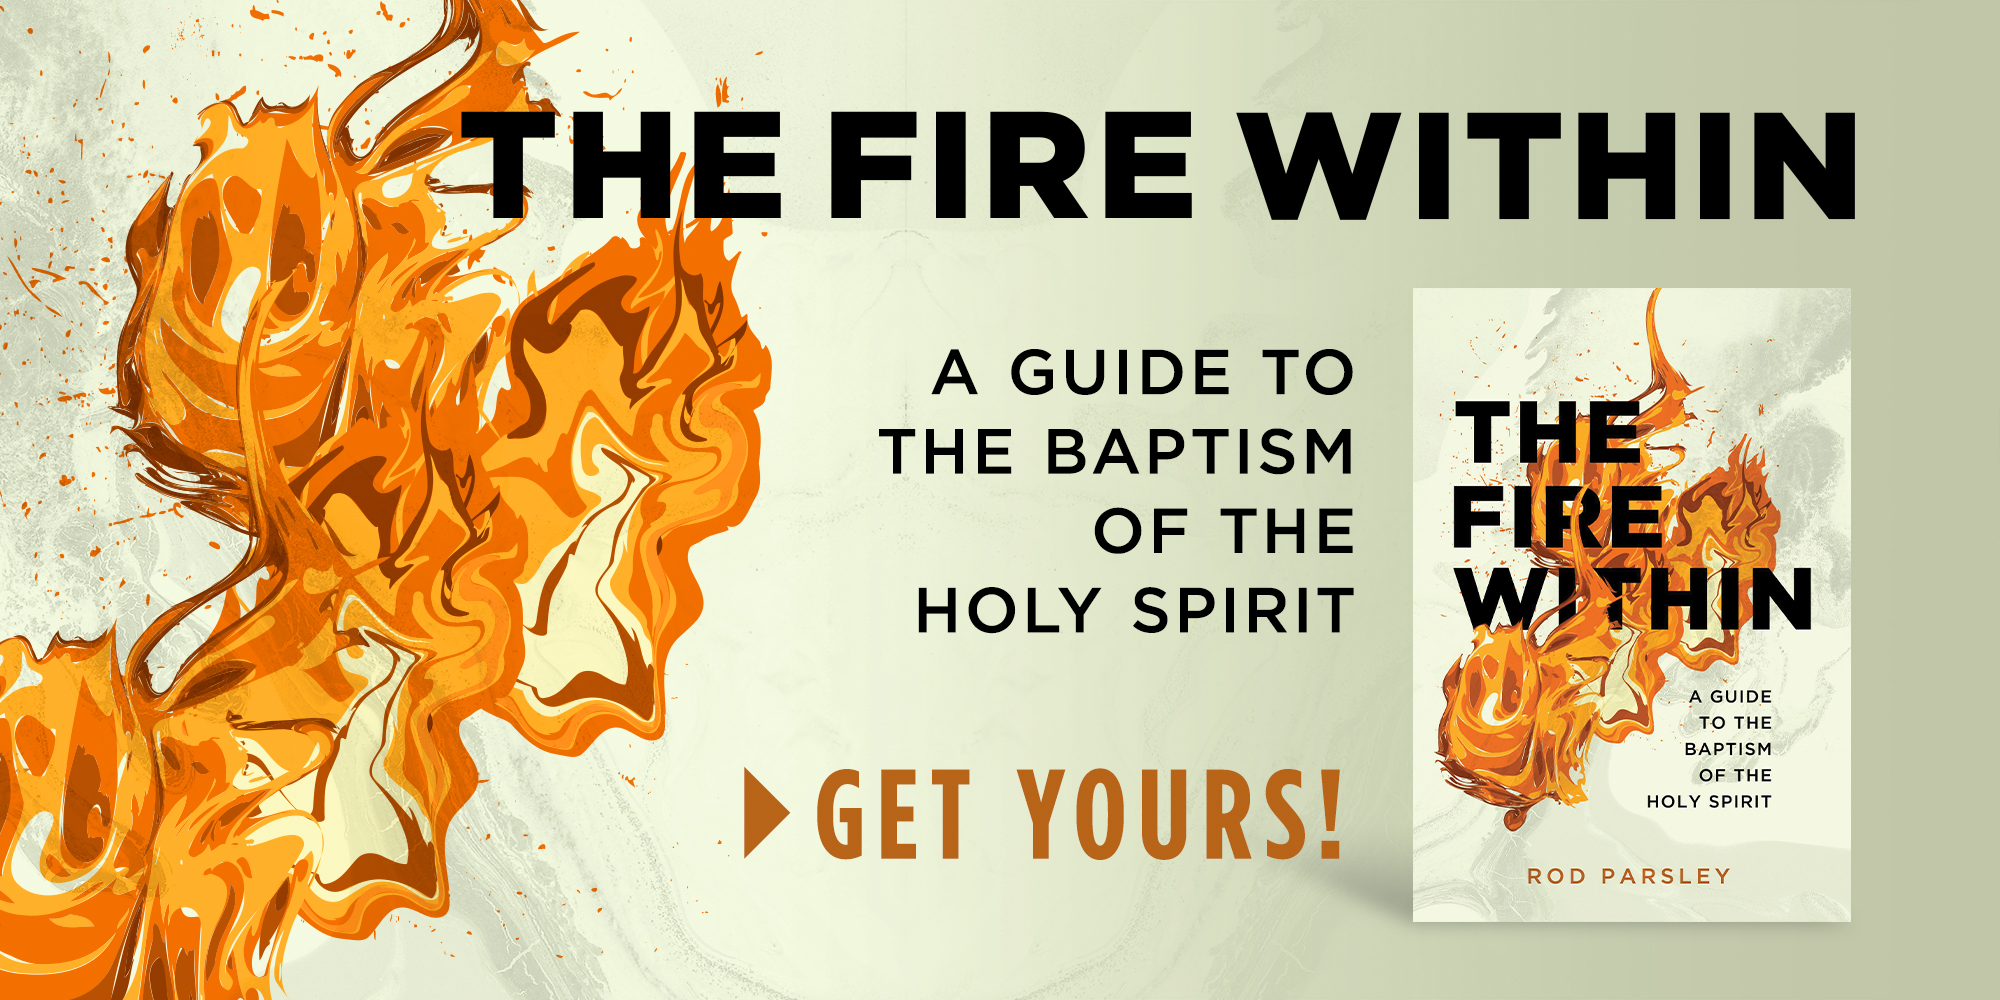 The Fire Within, A Guide to the Baptism of the Holy Spirit